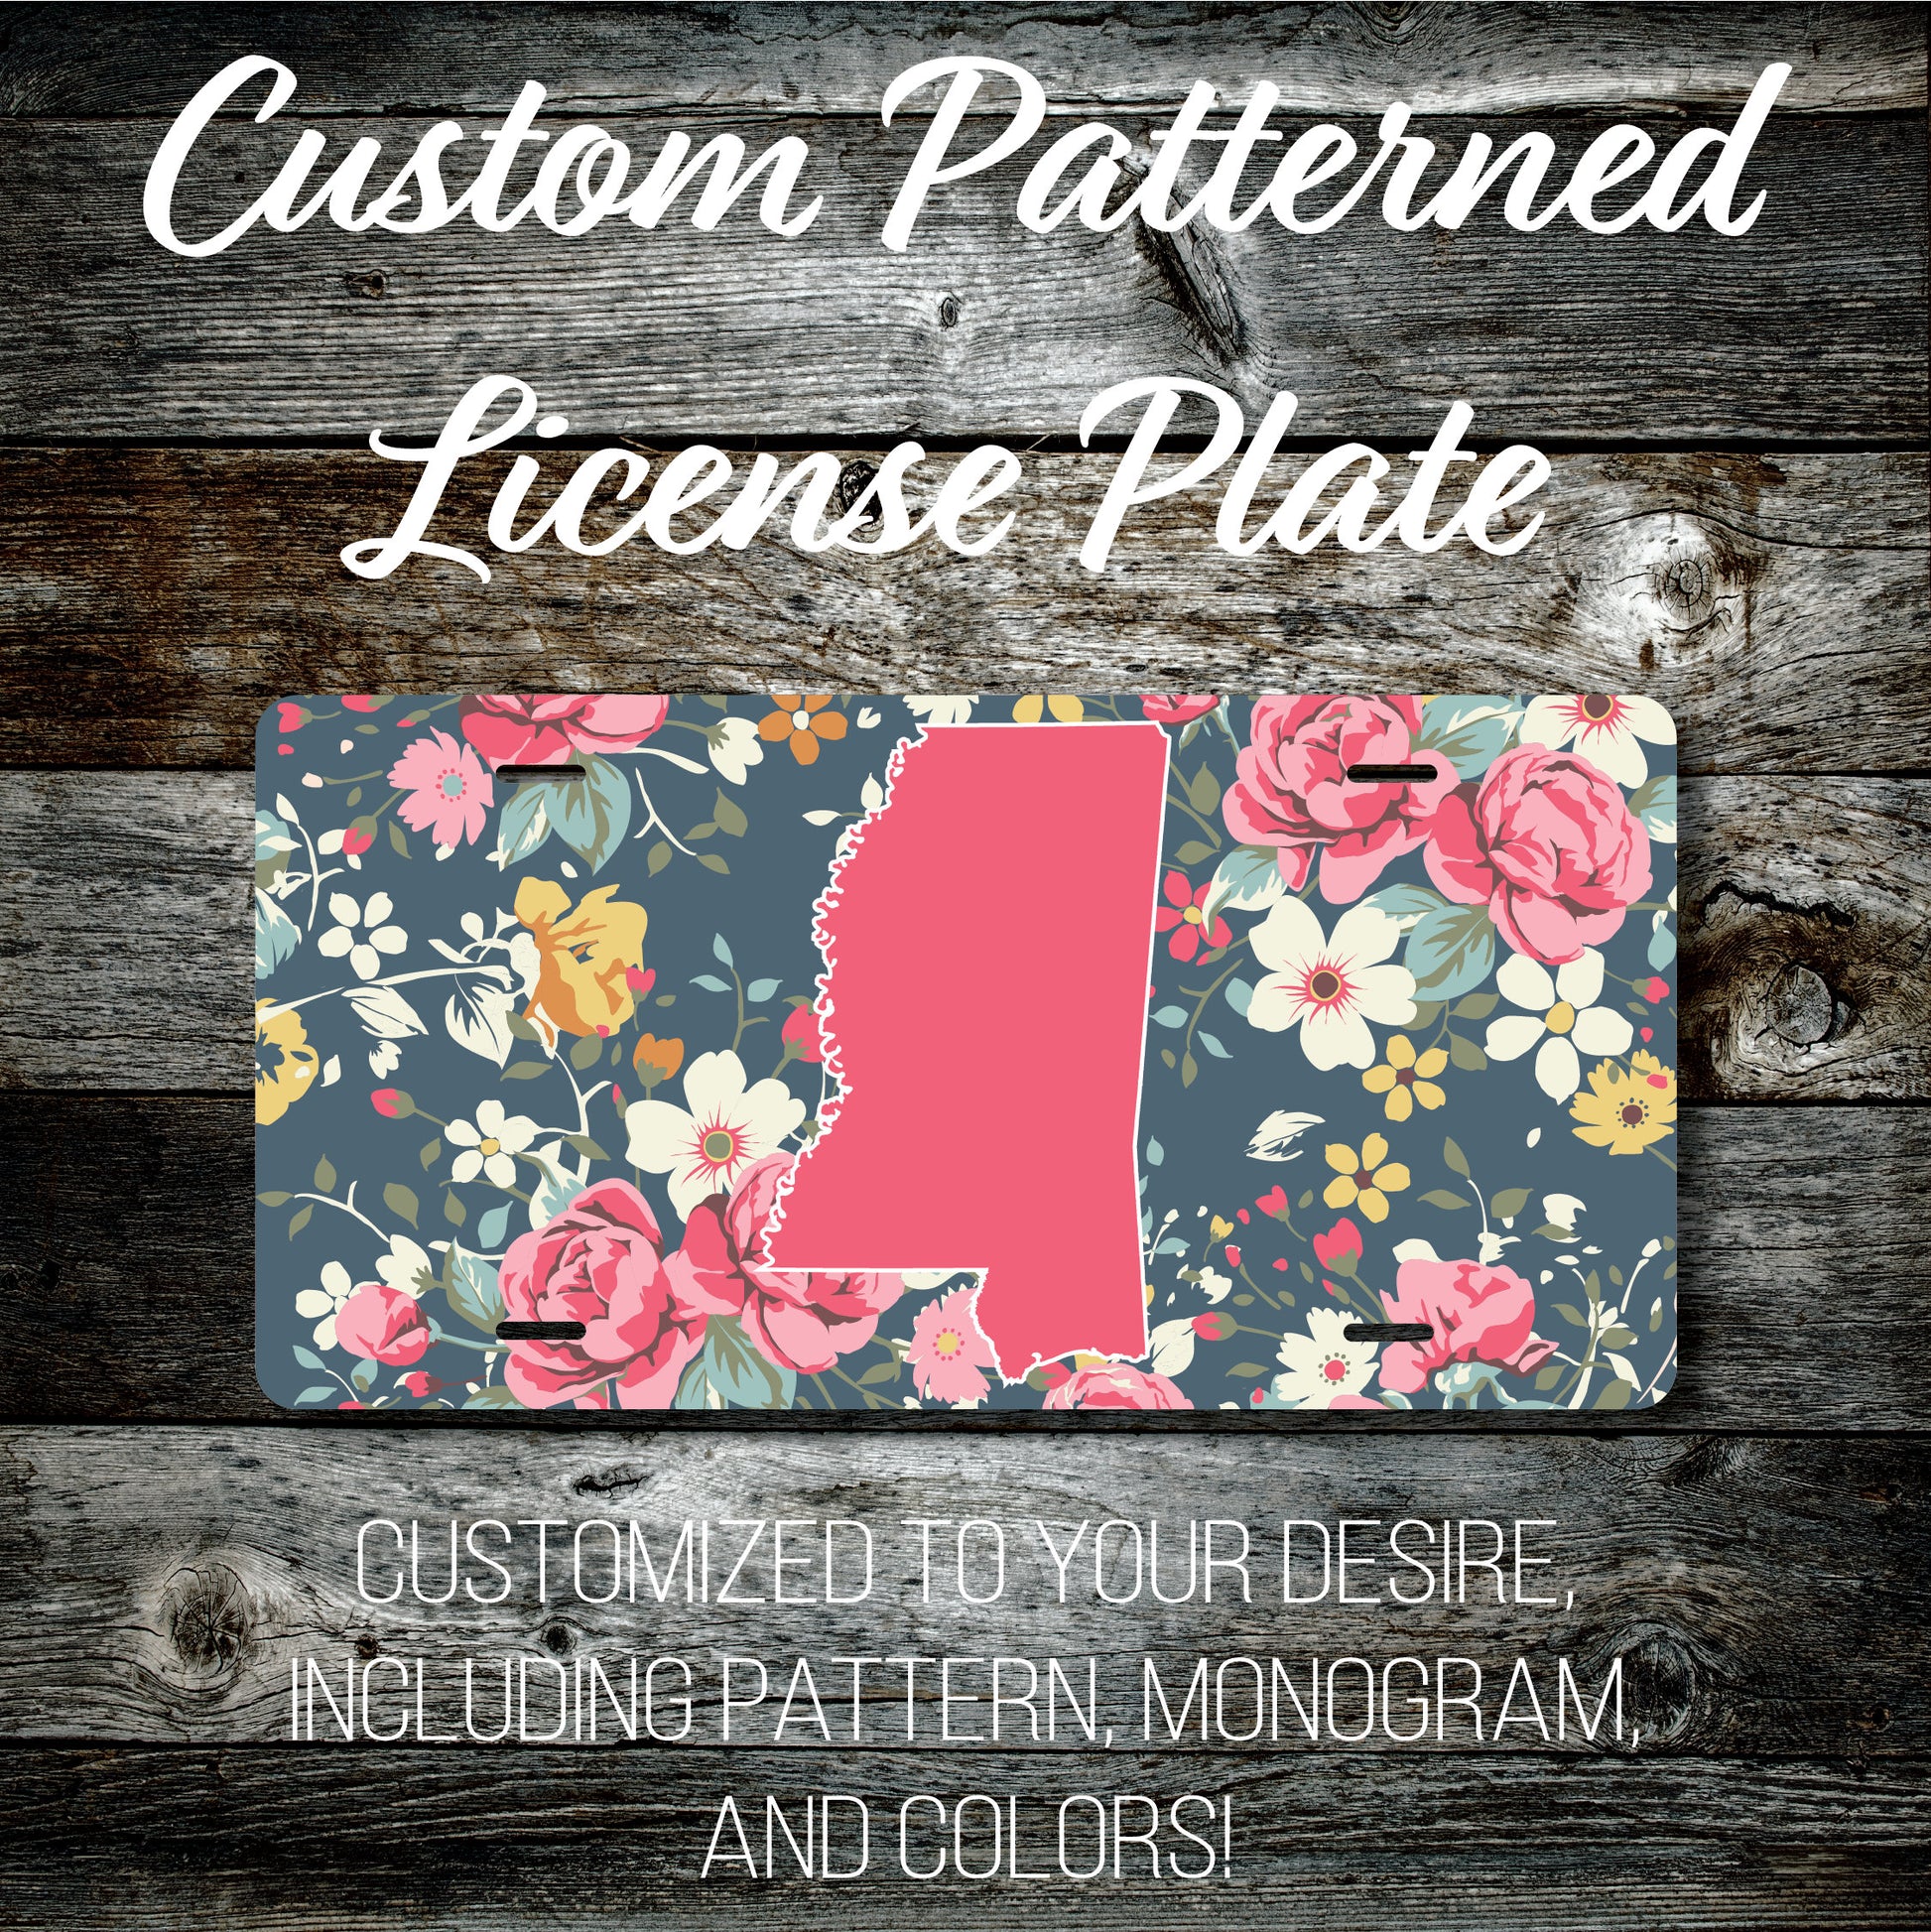 Personalized Monogrammed Custom Mississippi License Plate (Pattern #265MS), Car Tag, Vanity license plate, Floral & Stripes Watercolor